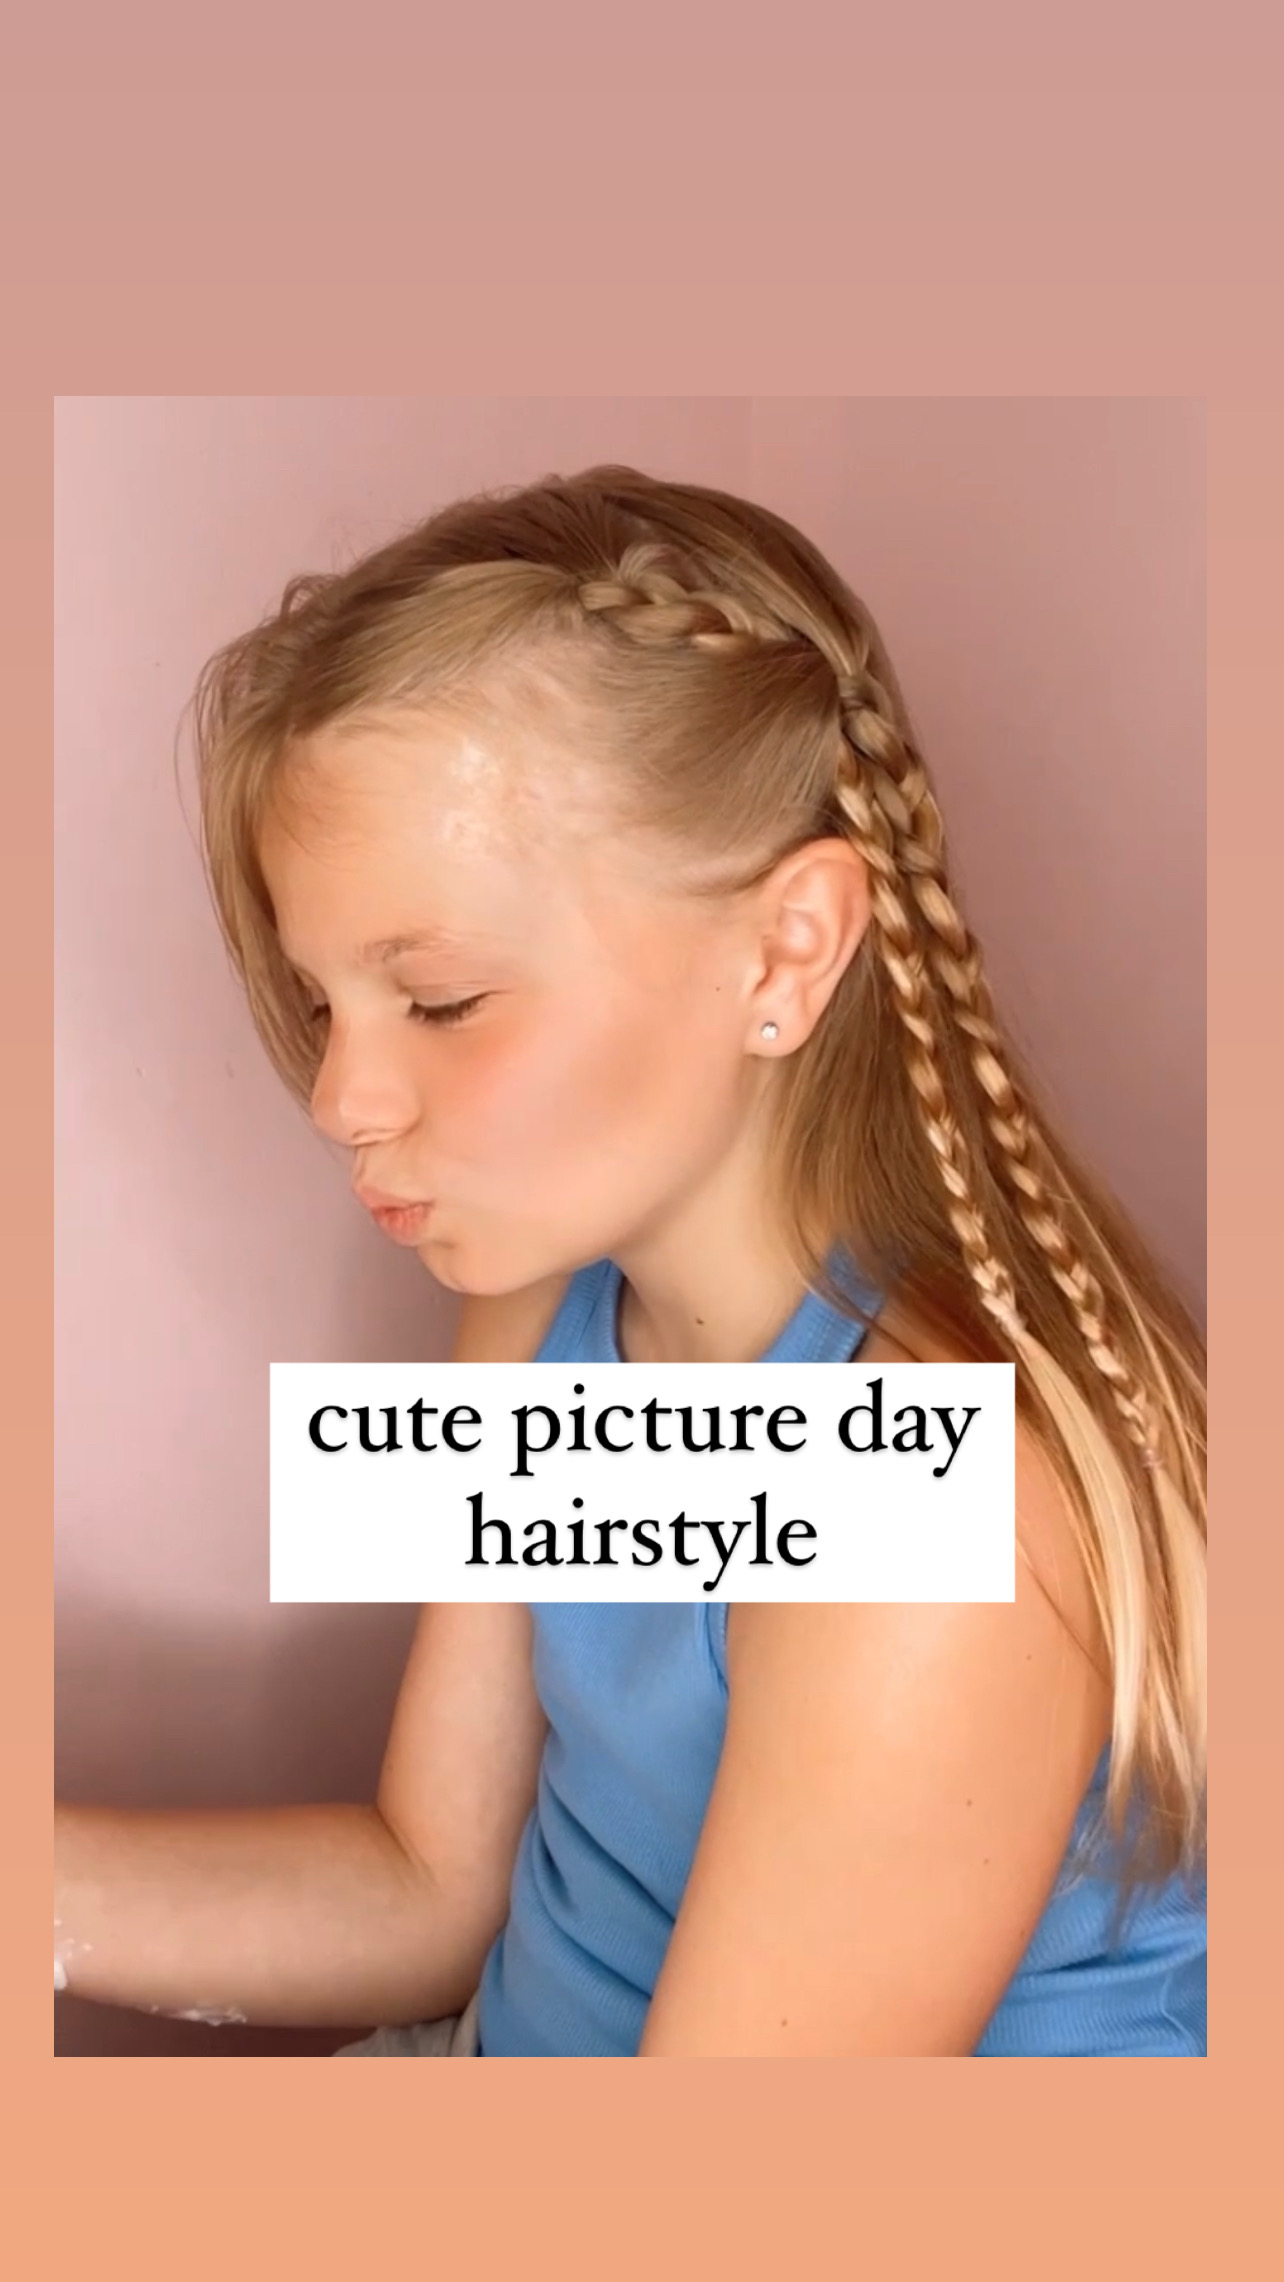 Quick Picture Day Hairstyle for School - Stylish Life for Moms